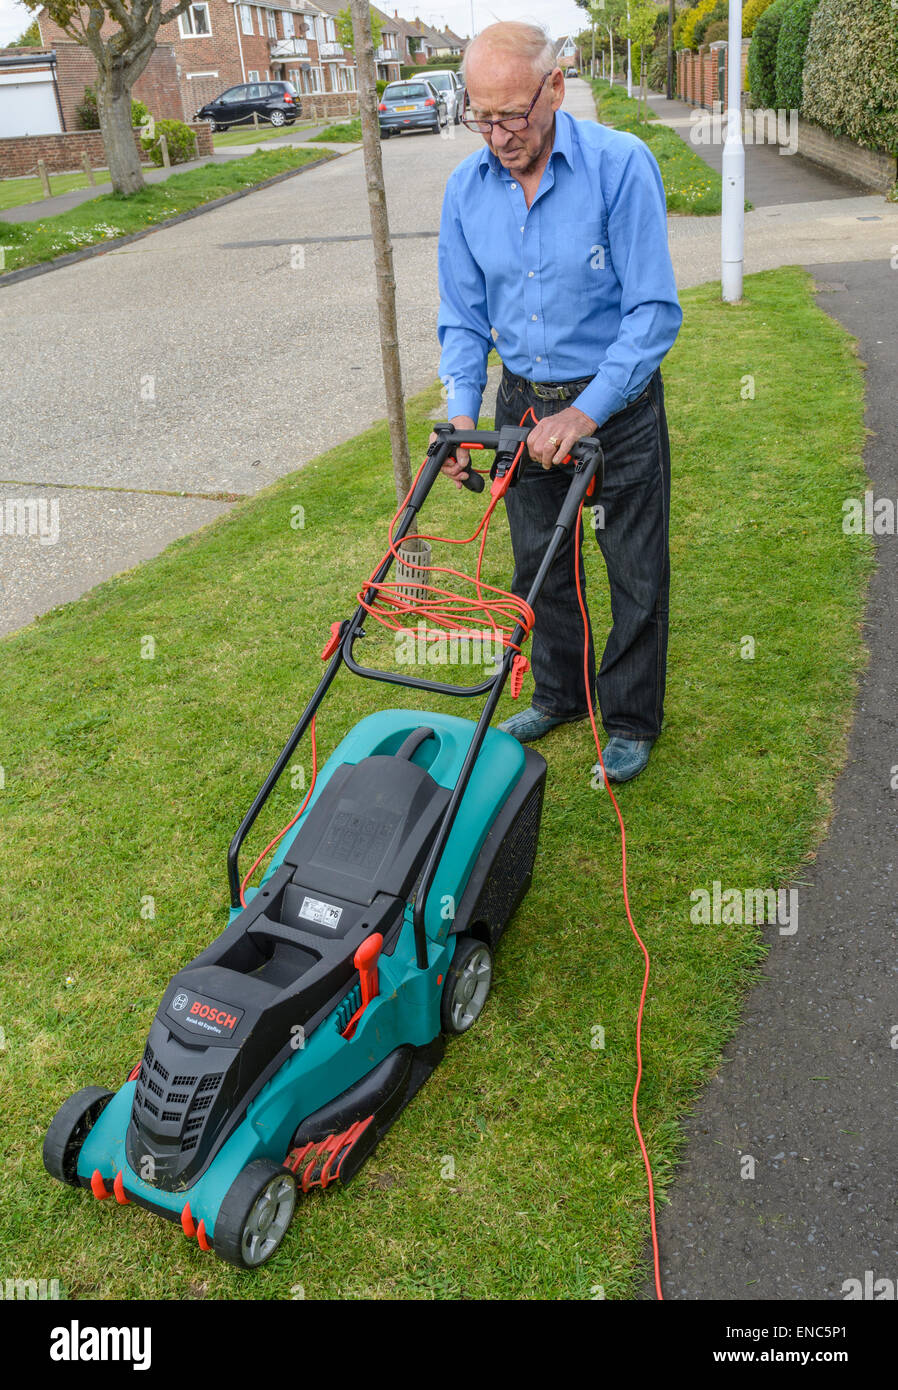 Elderly man mowing the grass verge by the roadside. Stock Photo